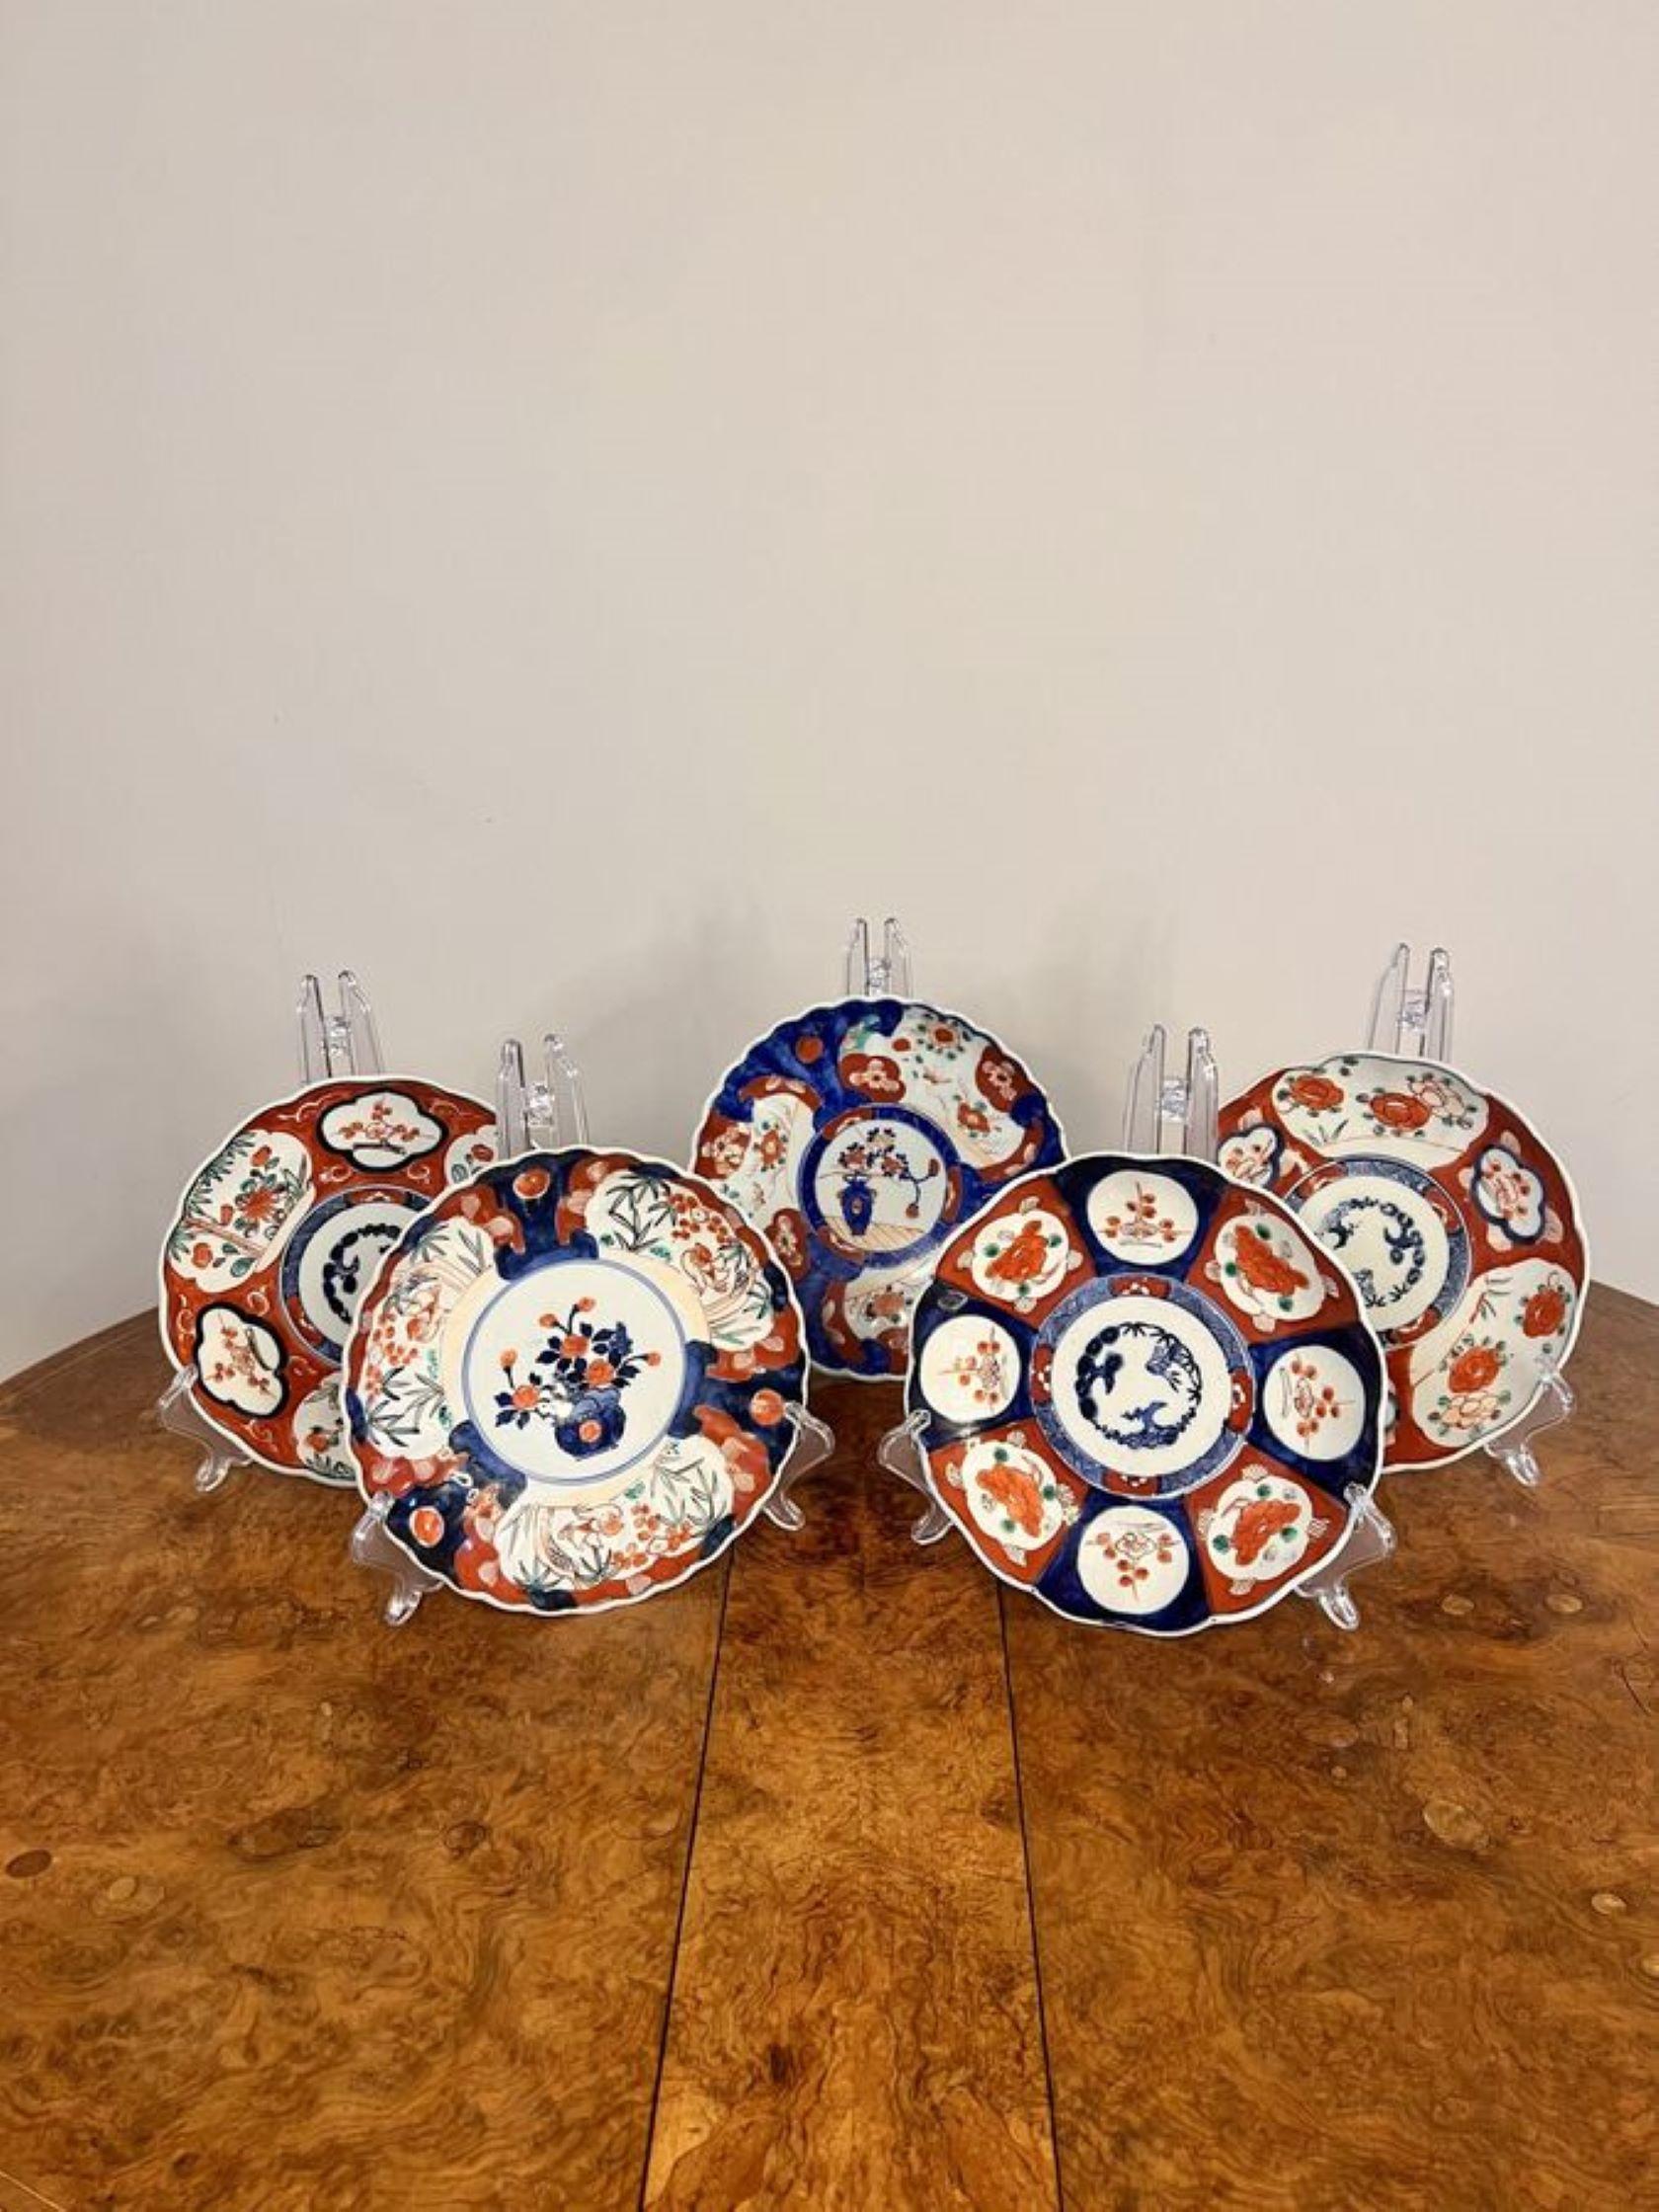 Quality collection of five antique Japanese imari plates having five antique Japanese imari plates all with lovely individual patterns decorated with flowers, trees, leaves, birds, fish and scrolls hand painted in wonderful red, blue, green, and